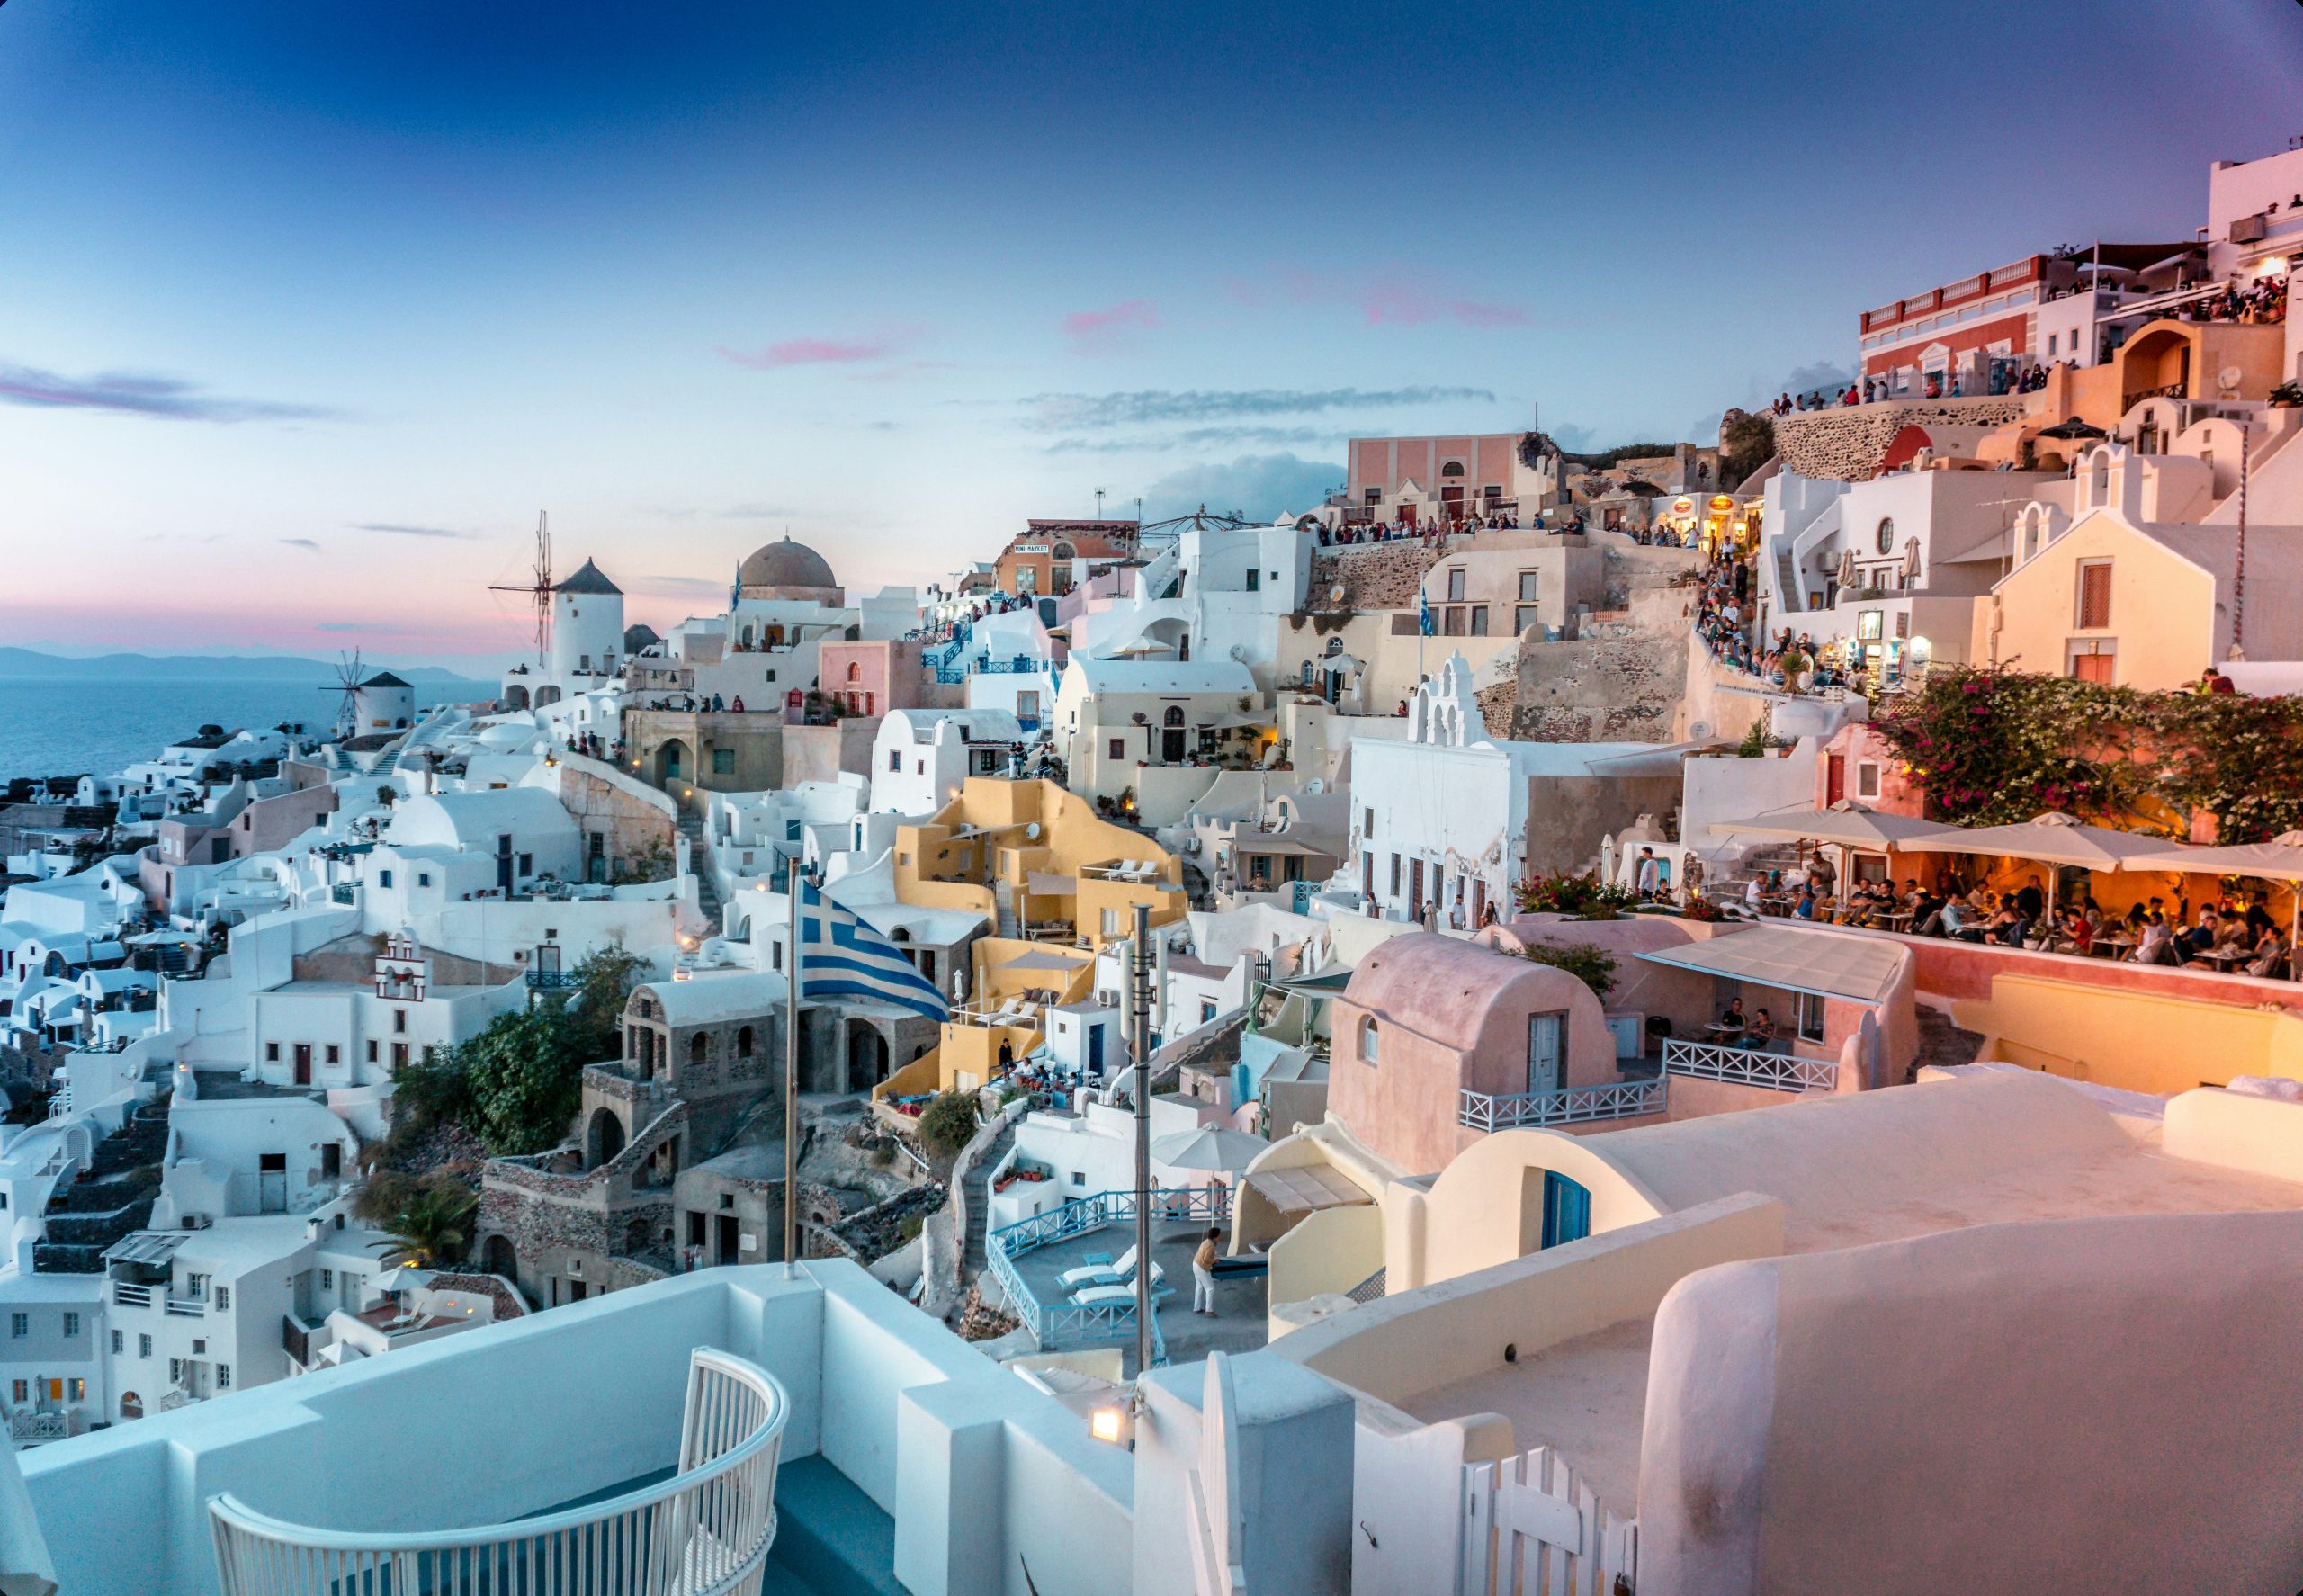 discover the beauty of santorini, with its stunning sunsets, white-washed buildings, and crystal-clear waters. plan your dream getaway to this enchanting greek island.